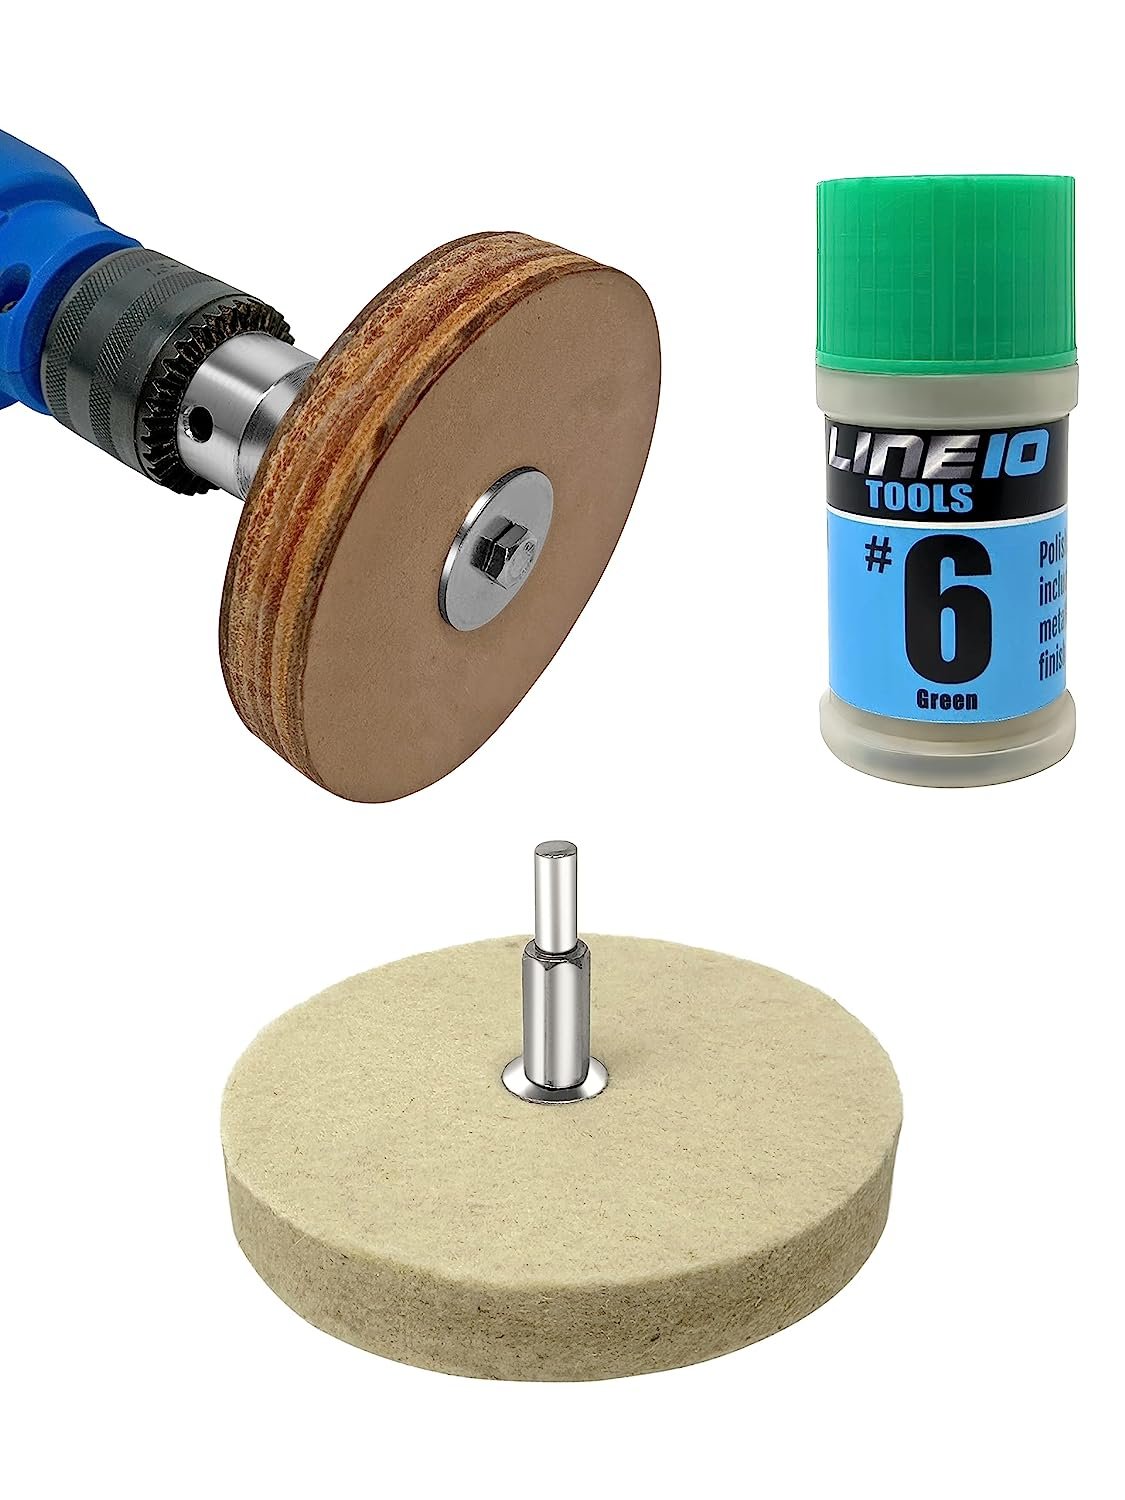 4 Metal Buffing Polishing Kit for Drill - Gold, Silver, Copper